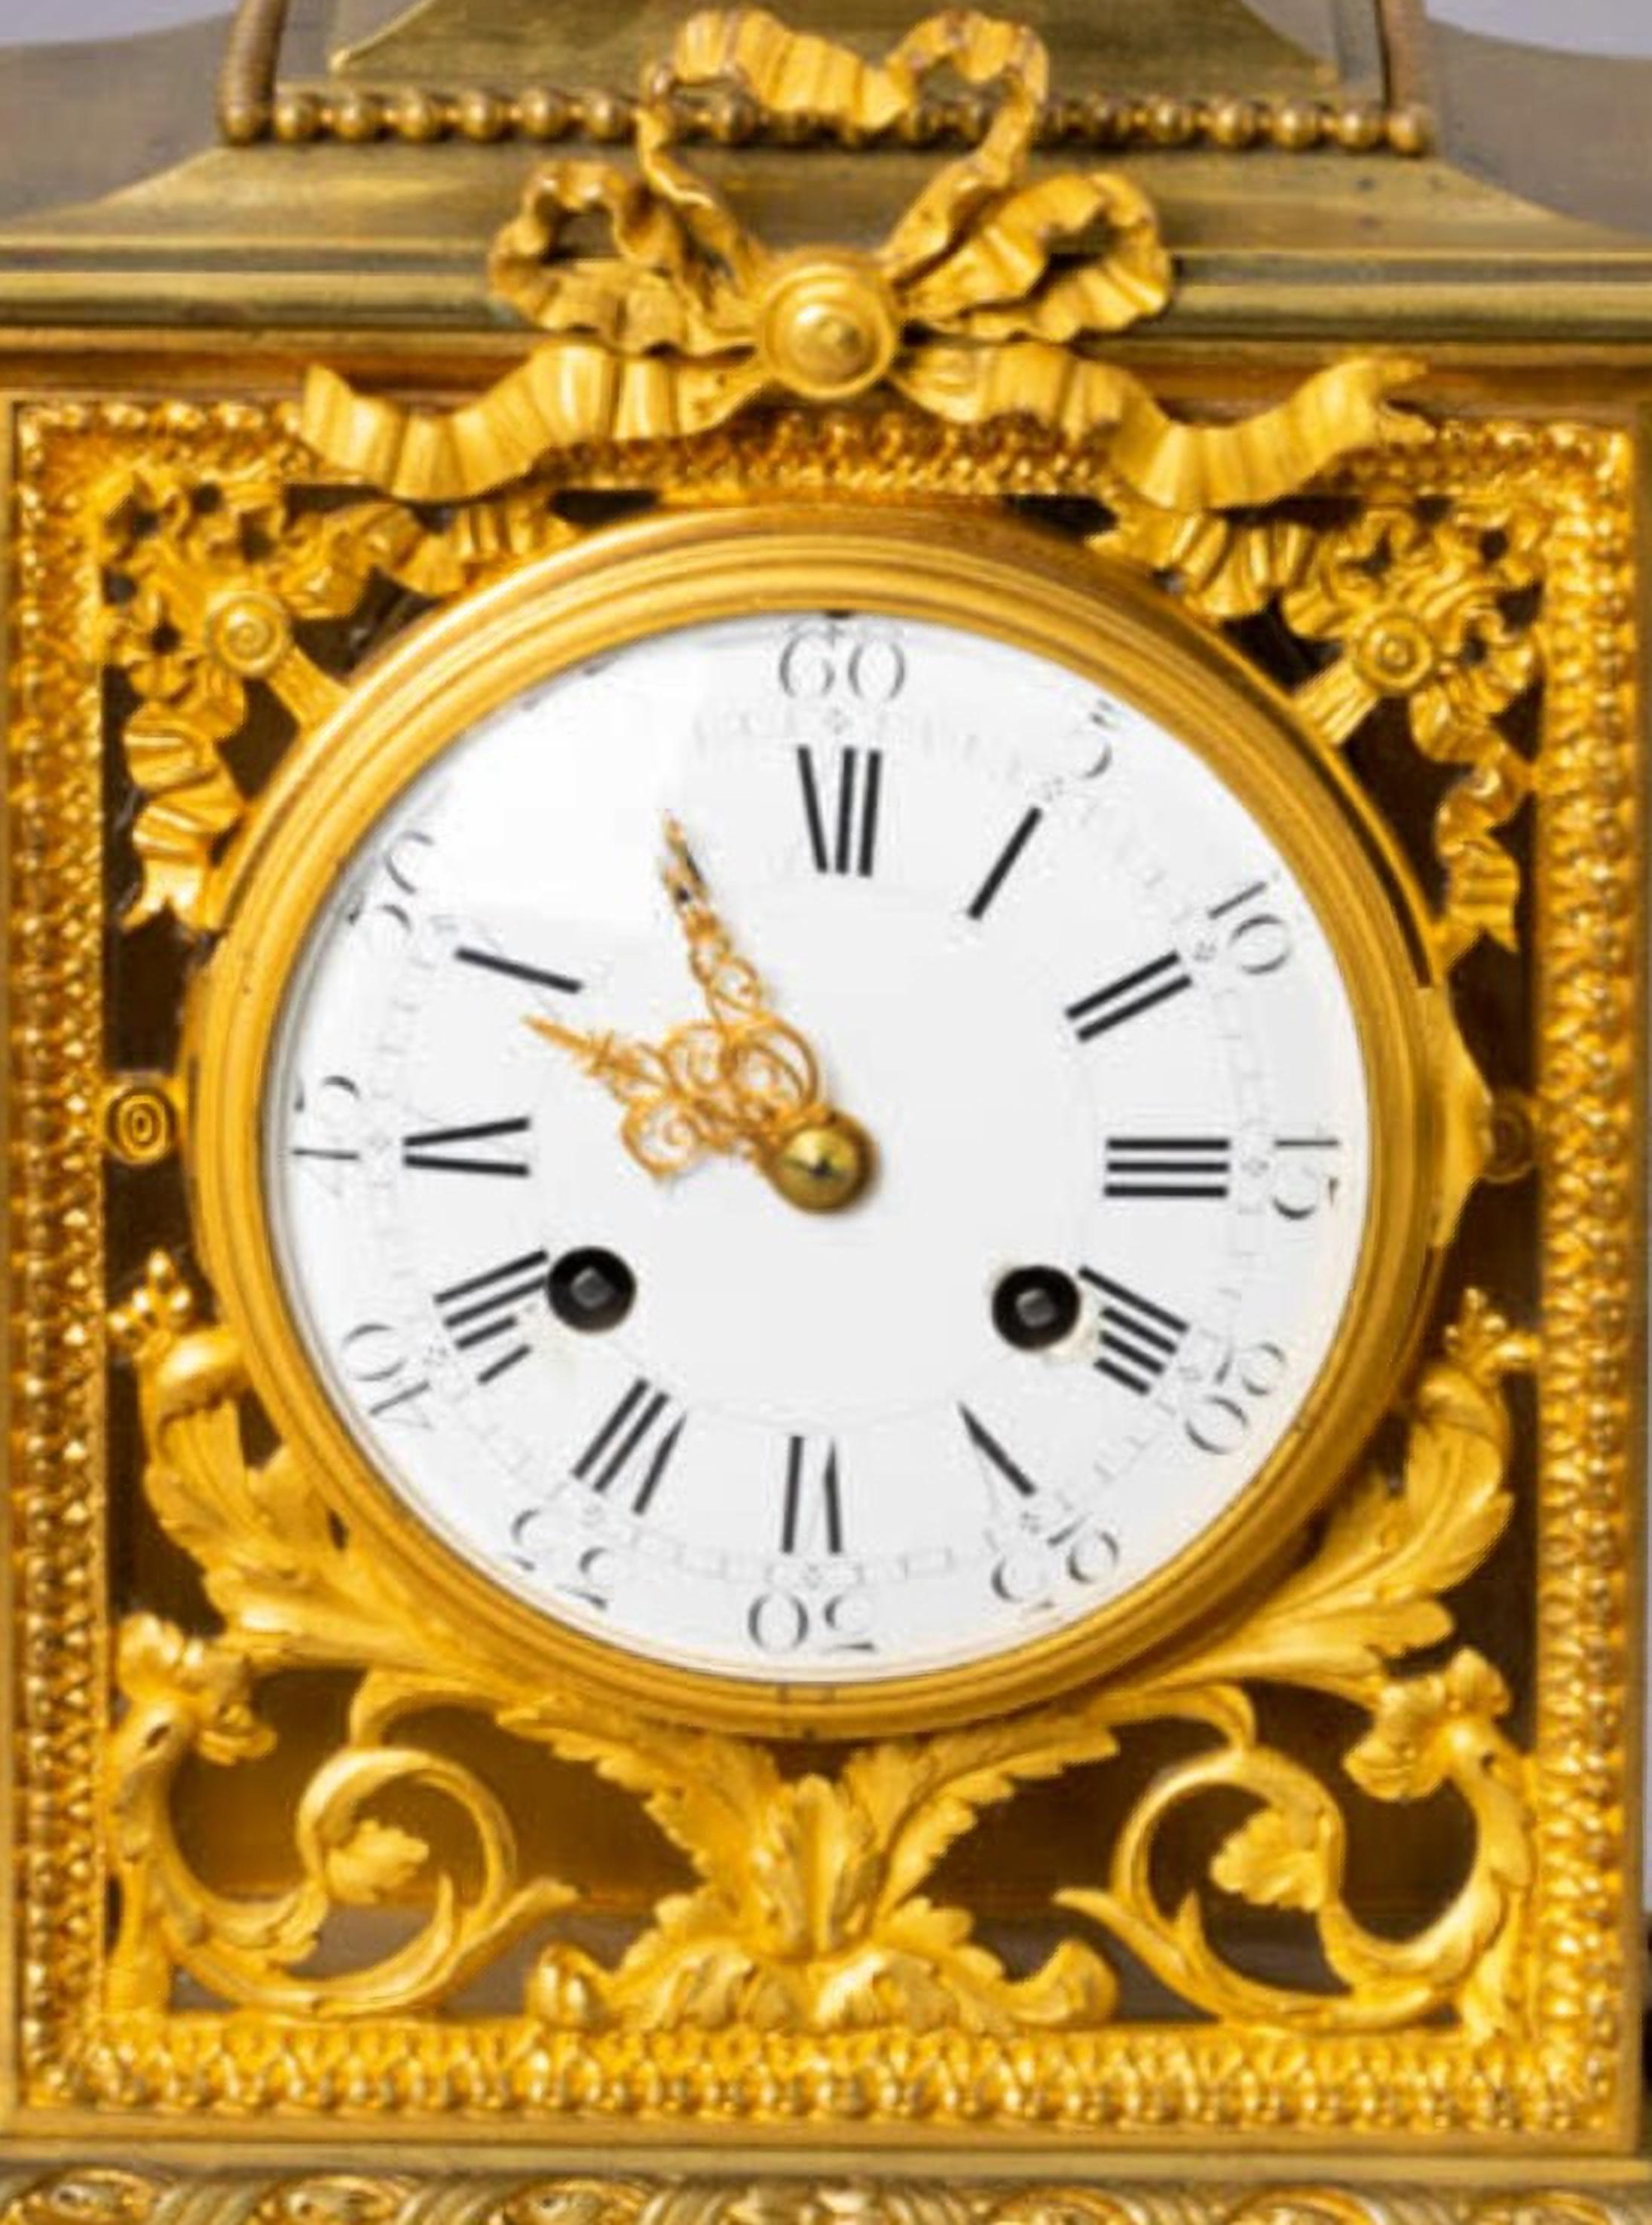 EMPIRE TABLE CLOCK Napoleon III 19th Century
In gilt bronze, relief and pierced decoration with plant elements, topped by a cup. 
Enamel dial with Roman numerals.
Marked. French,
good conditions
Dim.: 44,5x28x15 cm.